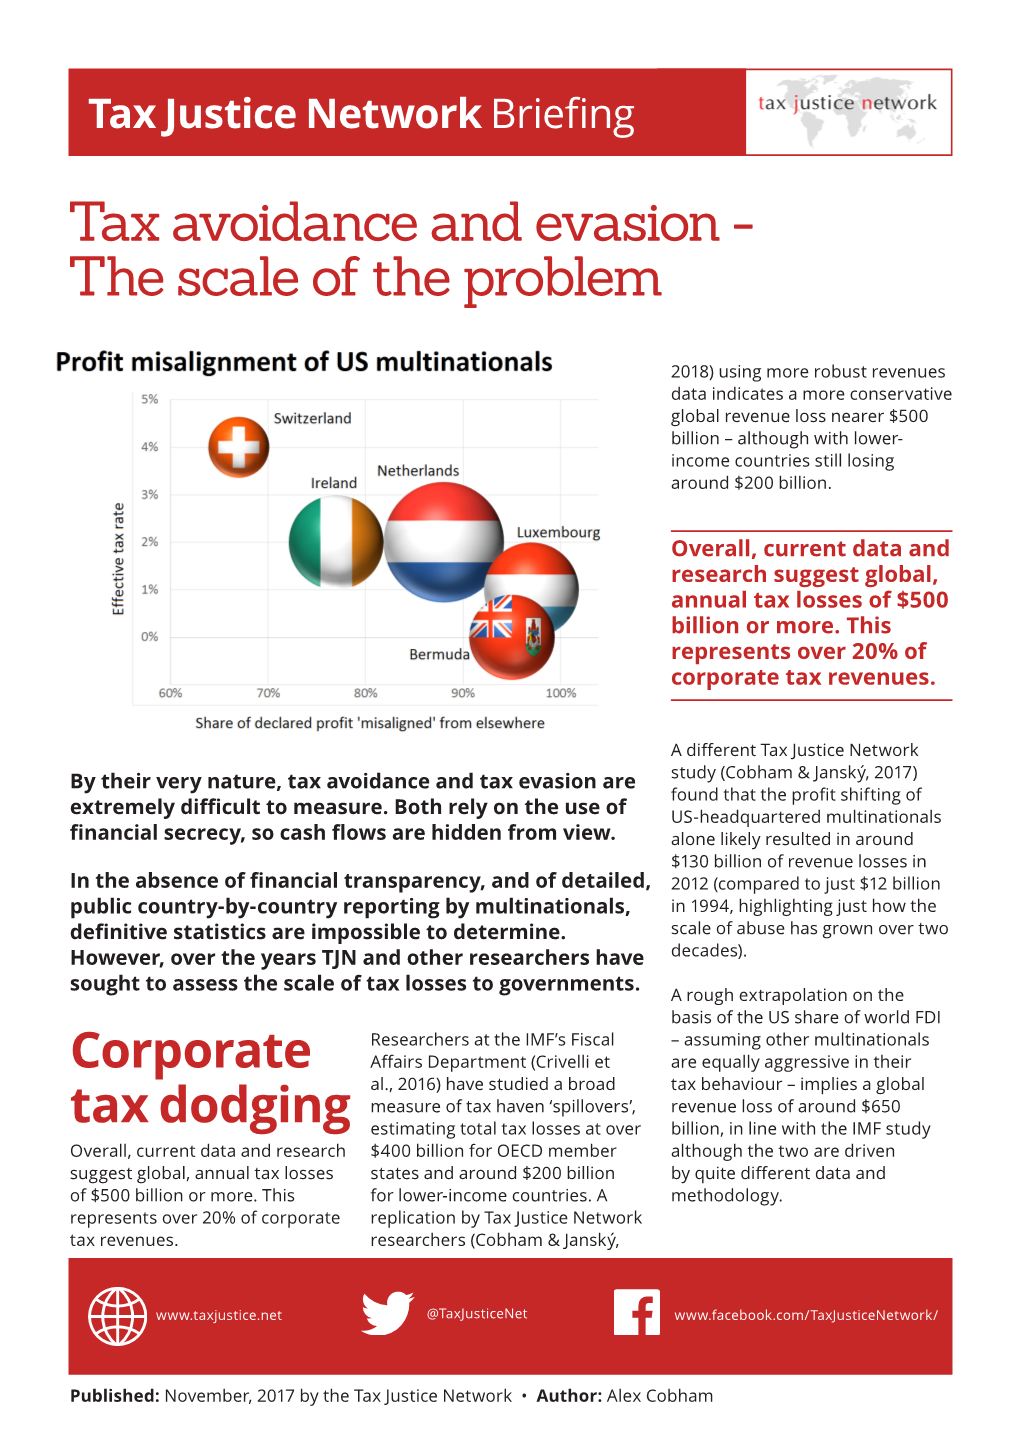 Tax Avoidance and Evasion - the Scale of the Problem